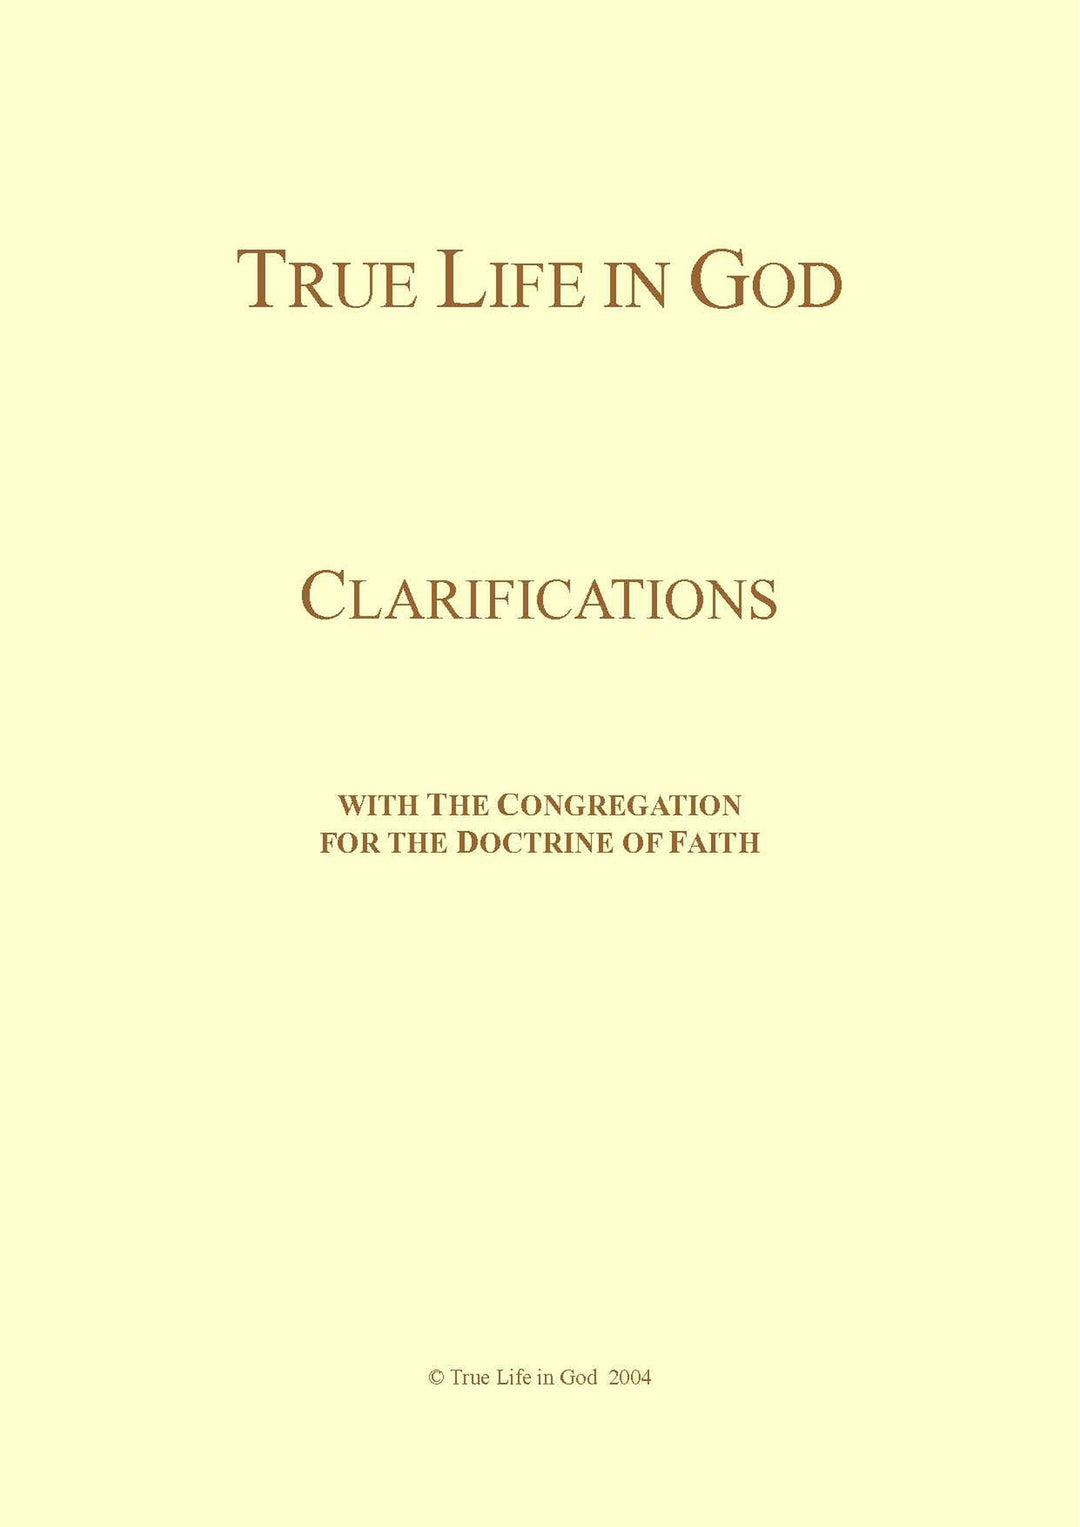 CLARIFICATIONS WITH THE CONGREGATION  FOR THE DOCTRINE OF FAITH